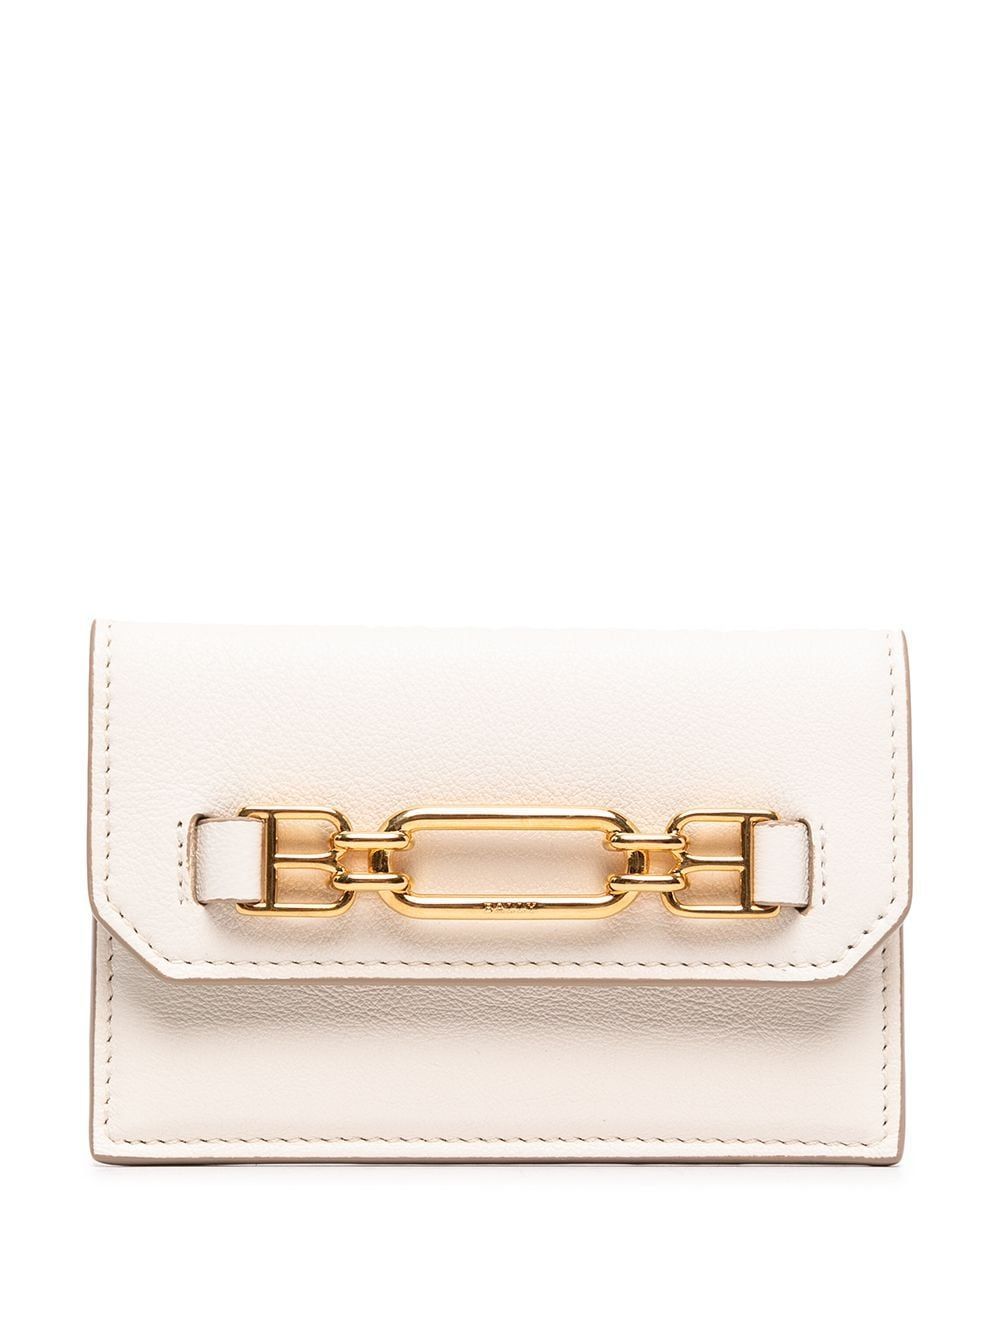 Bally Varly wallet in White